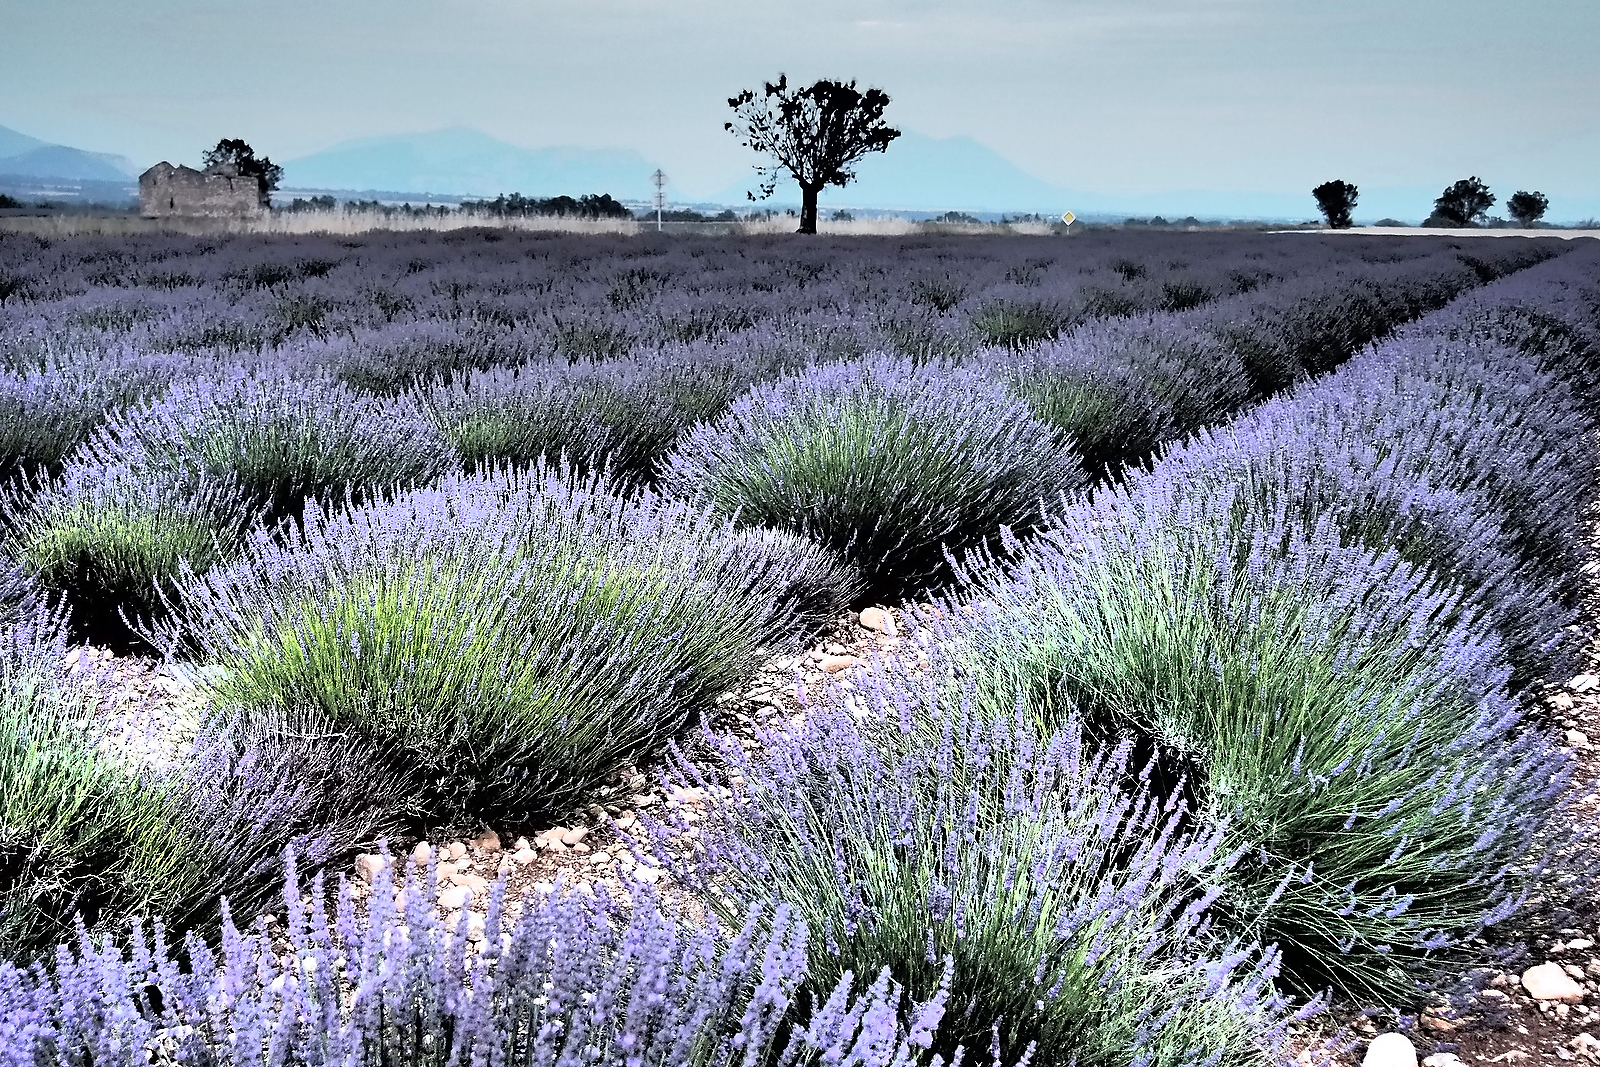 Lavender fields - we must be in Provence.